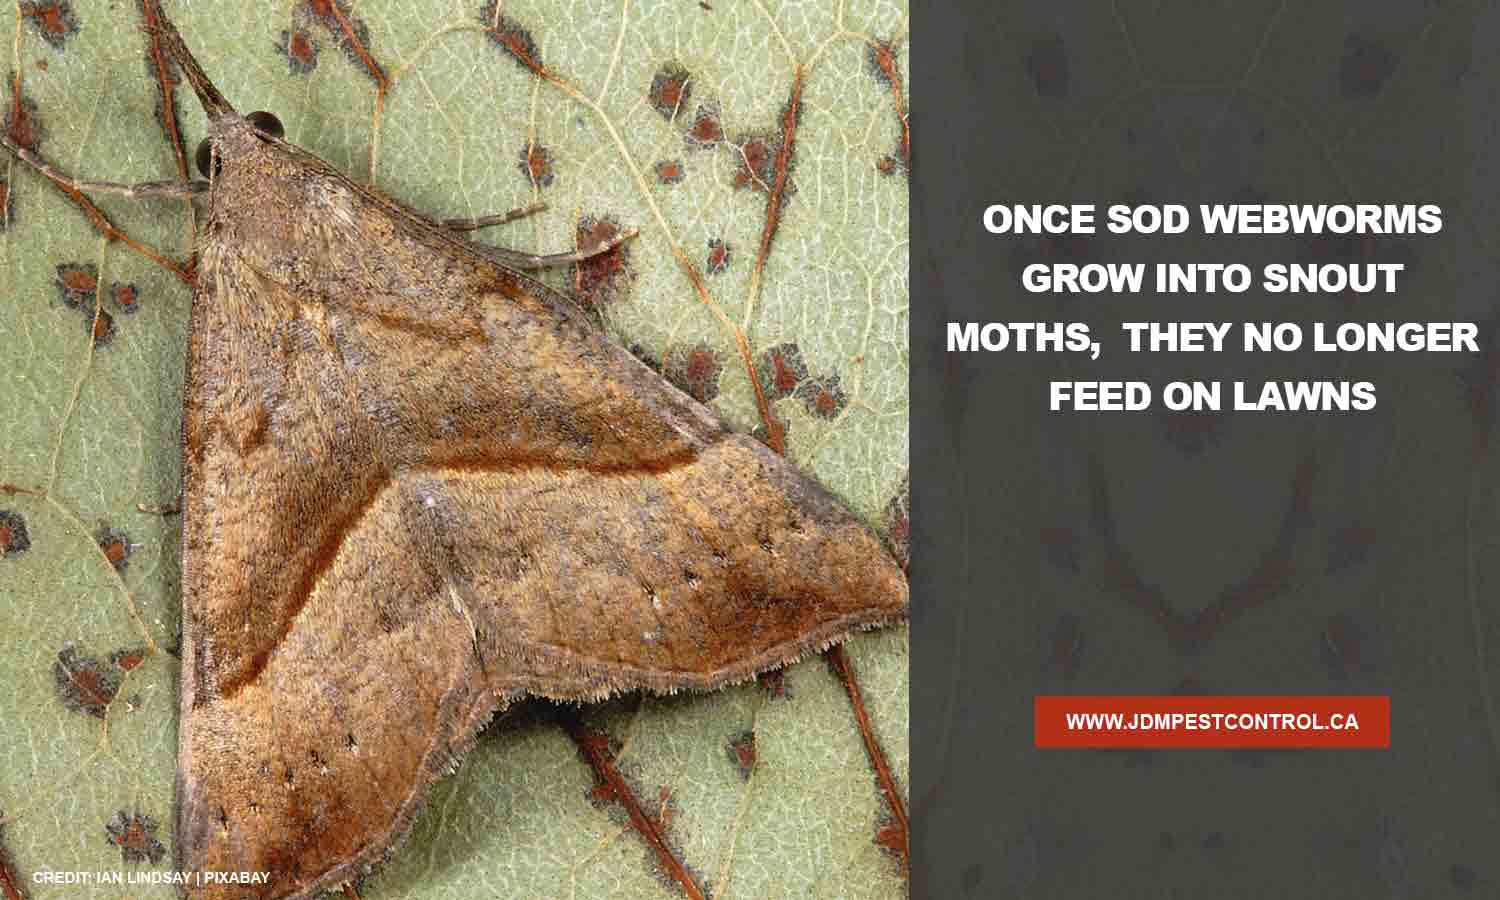 Once sod webworms grow into snout moths, they no longer feed on lawns